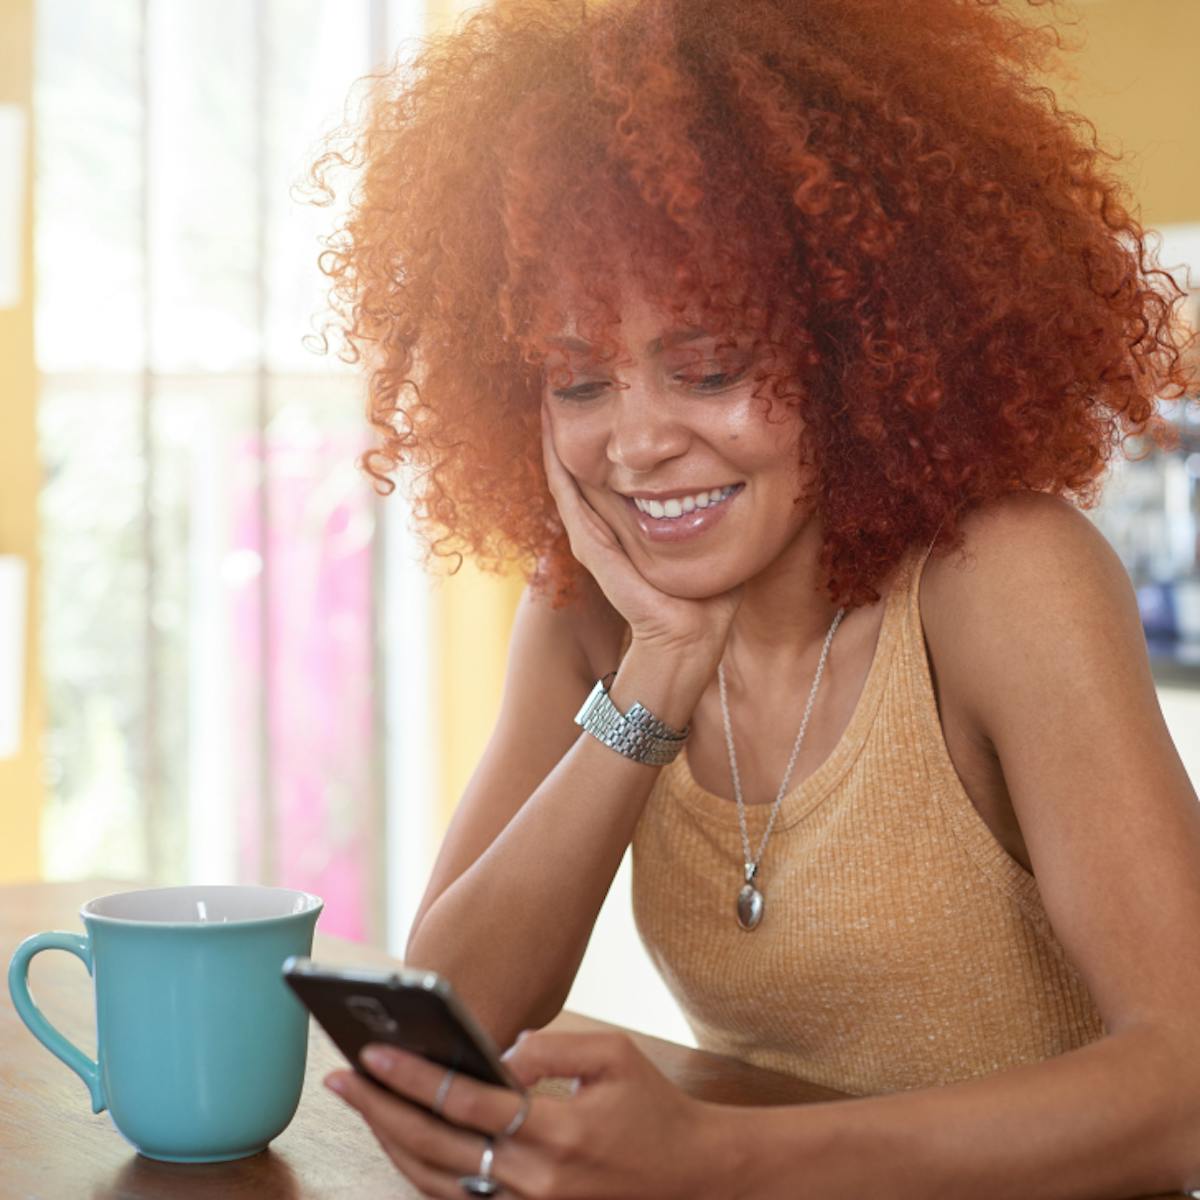 A woman sitting down looking at her phone and enjoying a cup of coffee